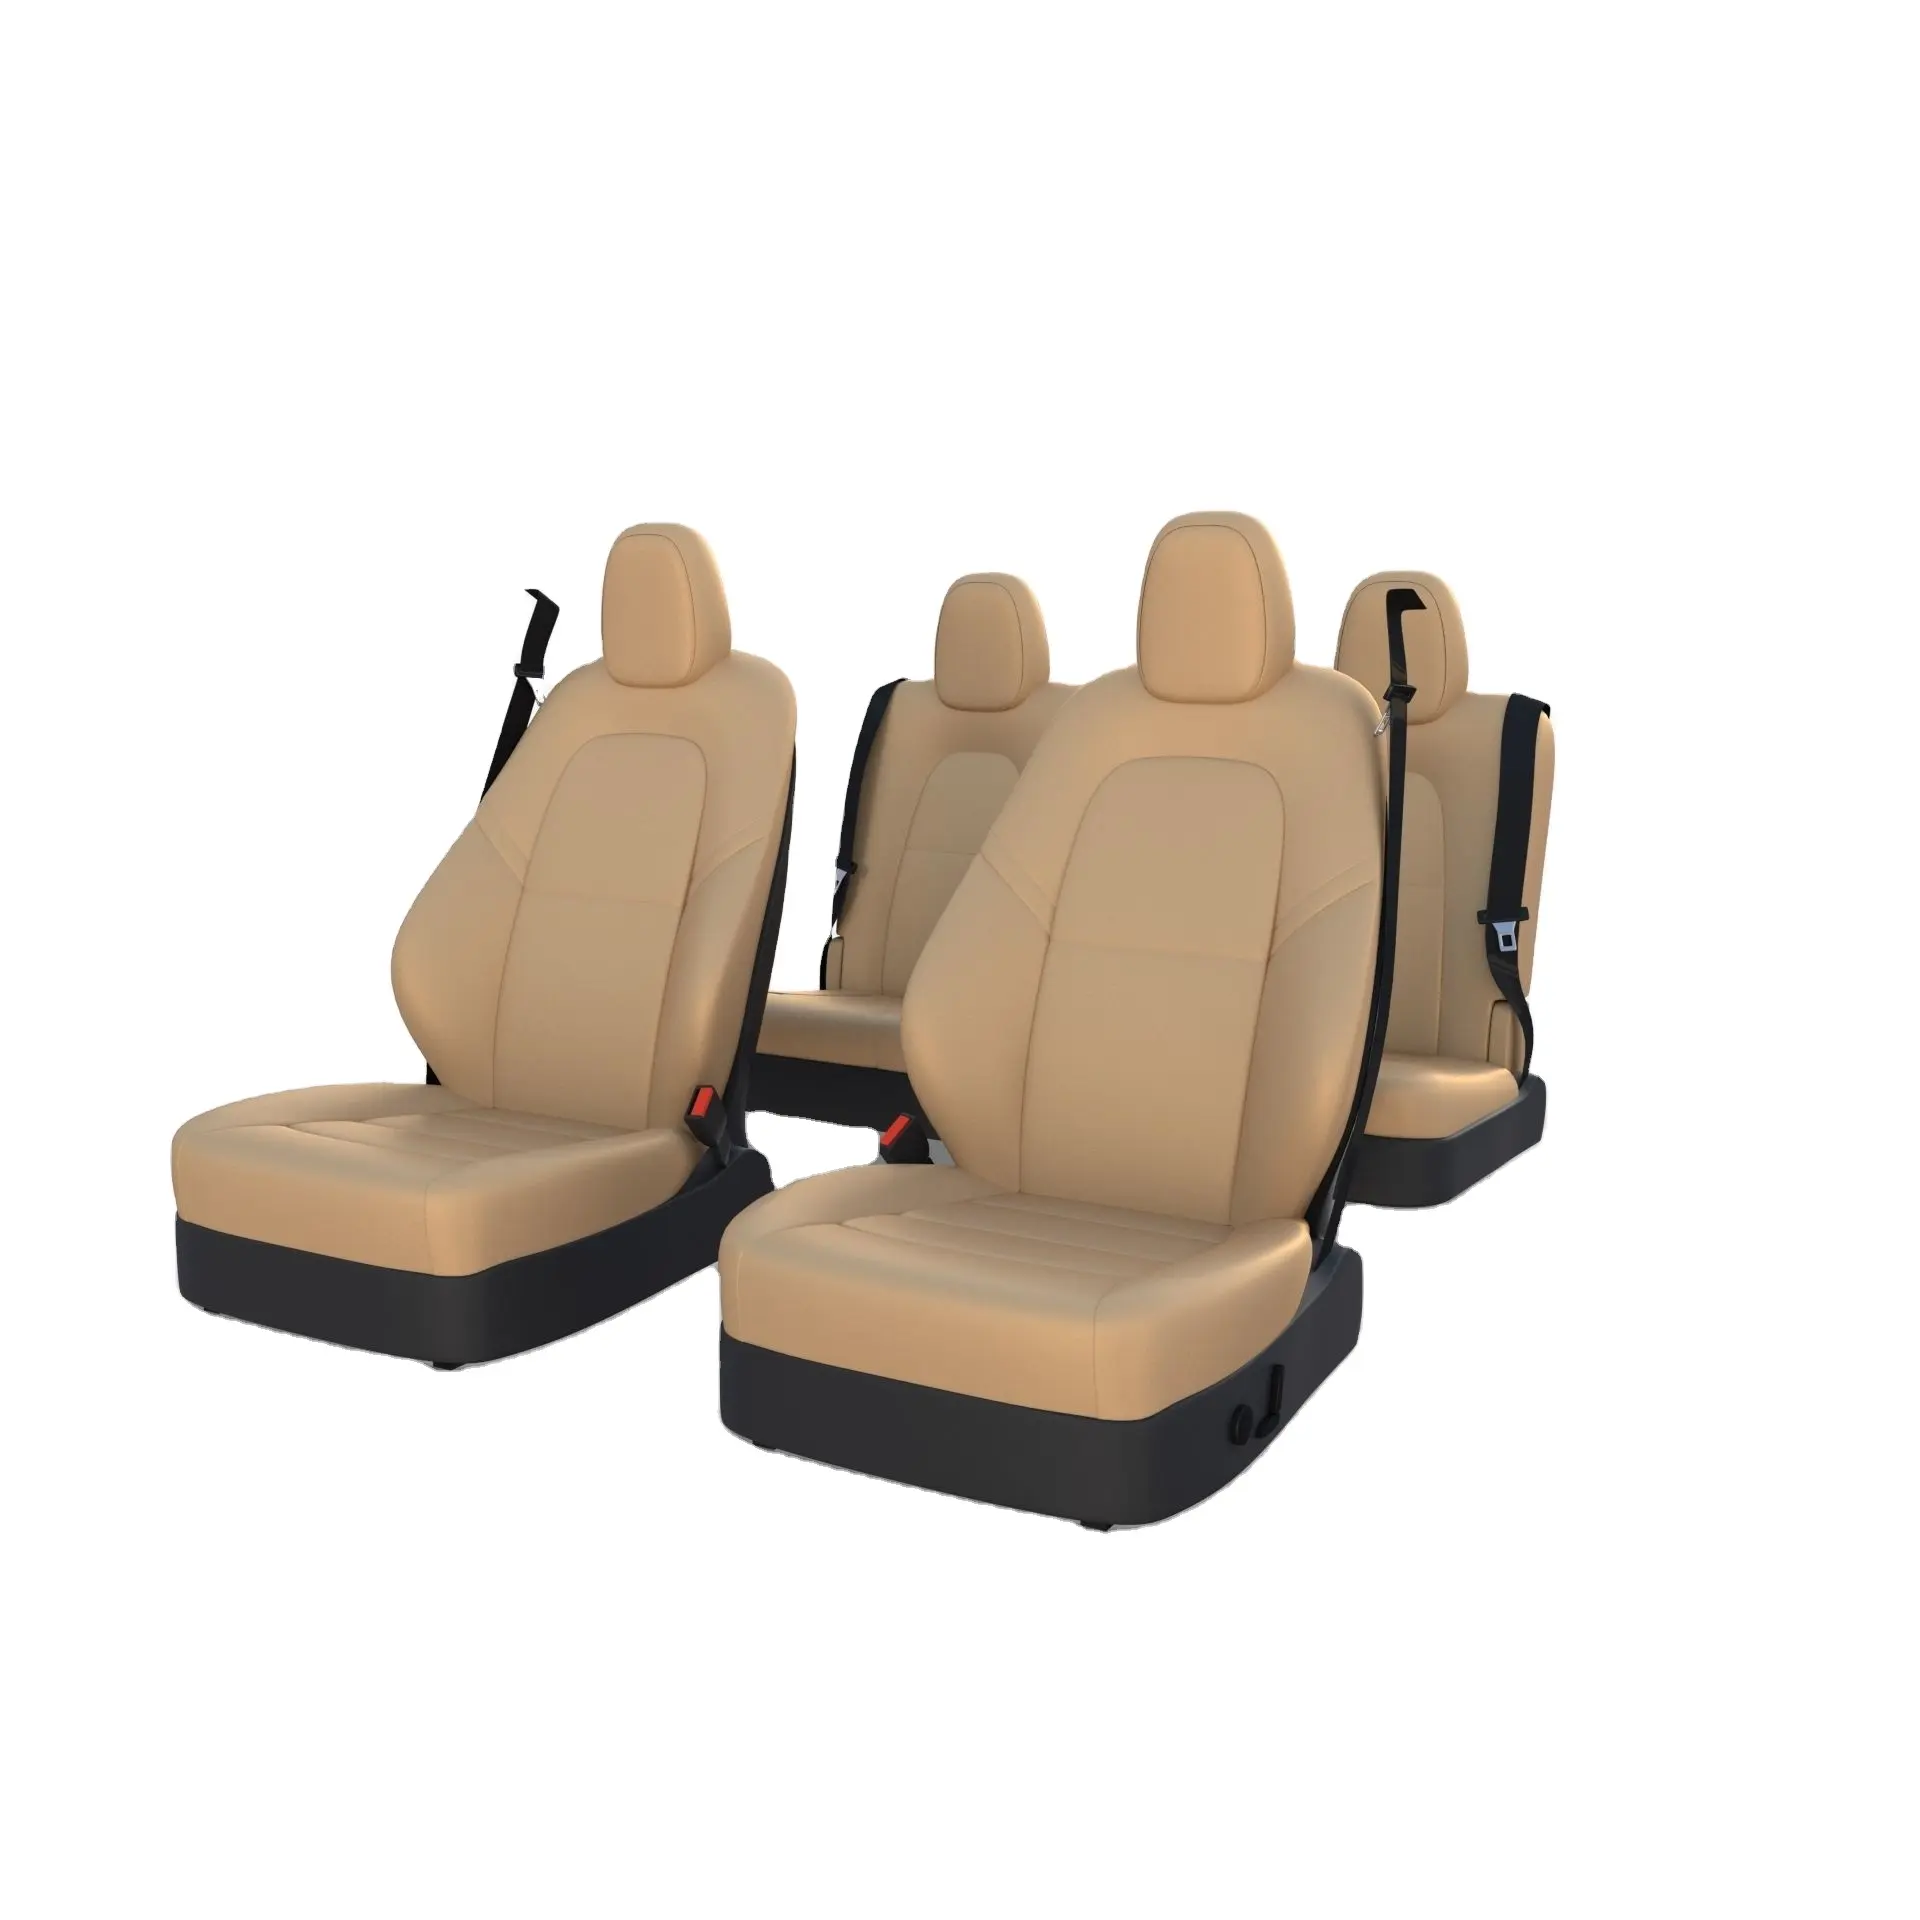 Wholesale Custom Best Waterproof Covers Seat Cover For Cars OEM, imitation leather